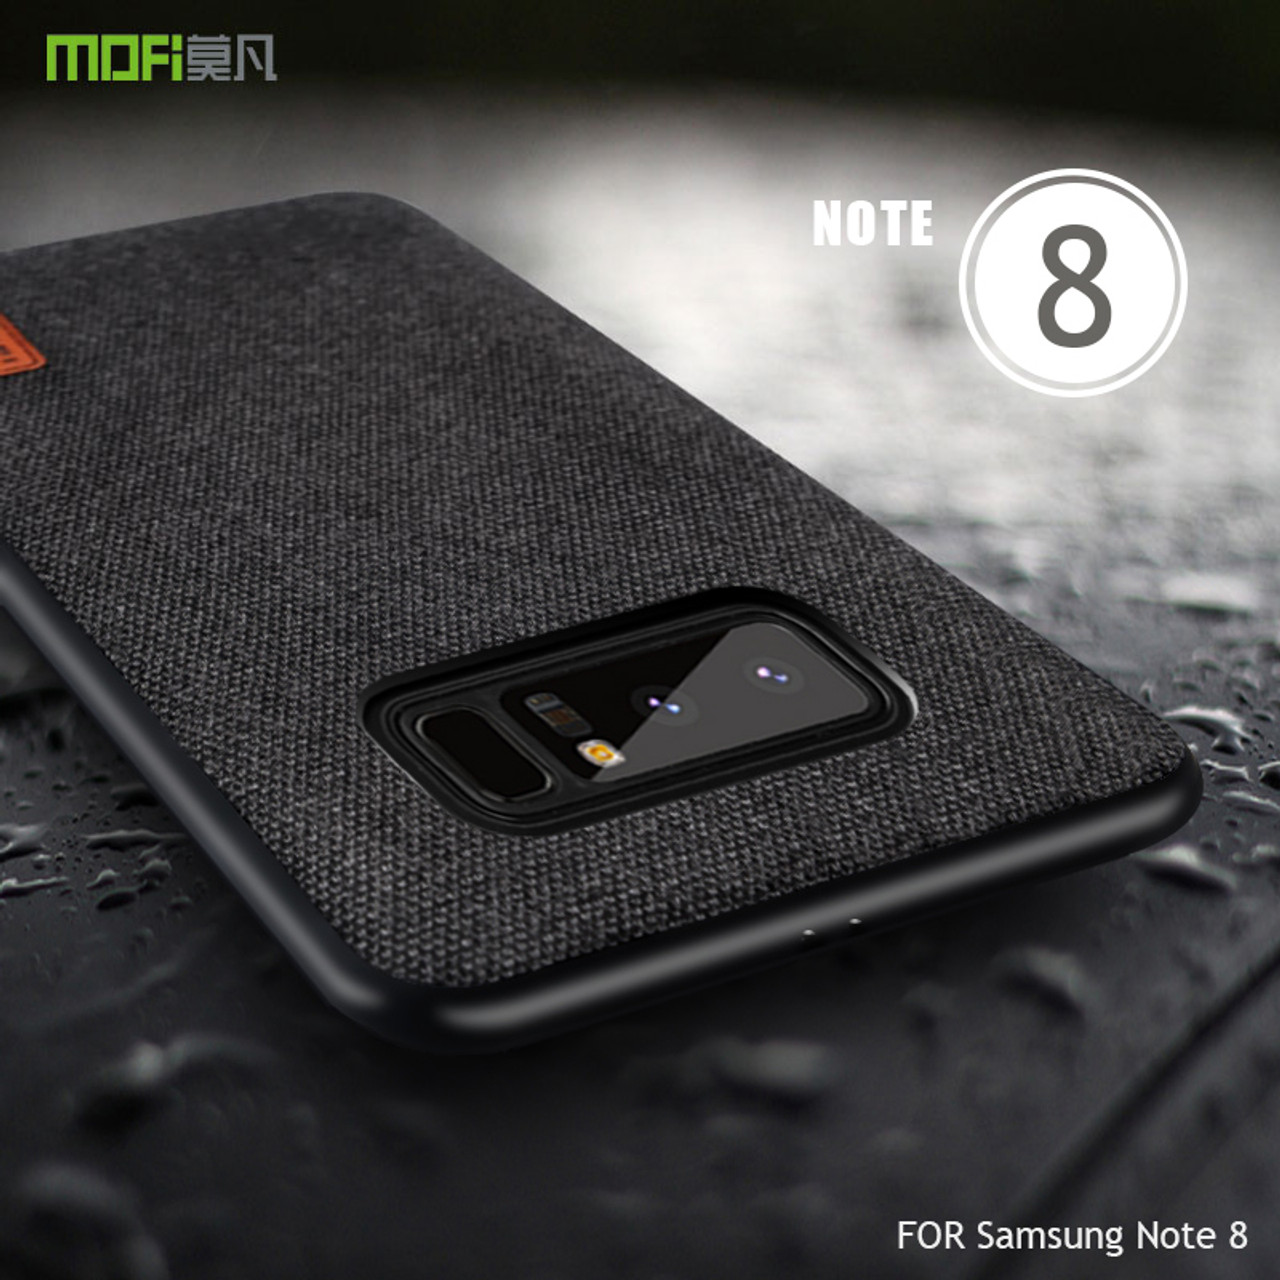 For Samsung Galaxy Note 8 Case Cover Galaxy Note 8 Back Cover Case Soft Silicone edge Full Cover Case Galaxy Note8 - OnshopDeals.Com